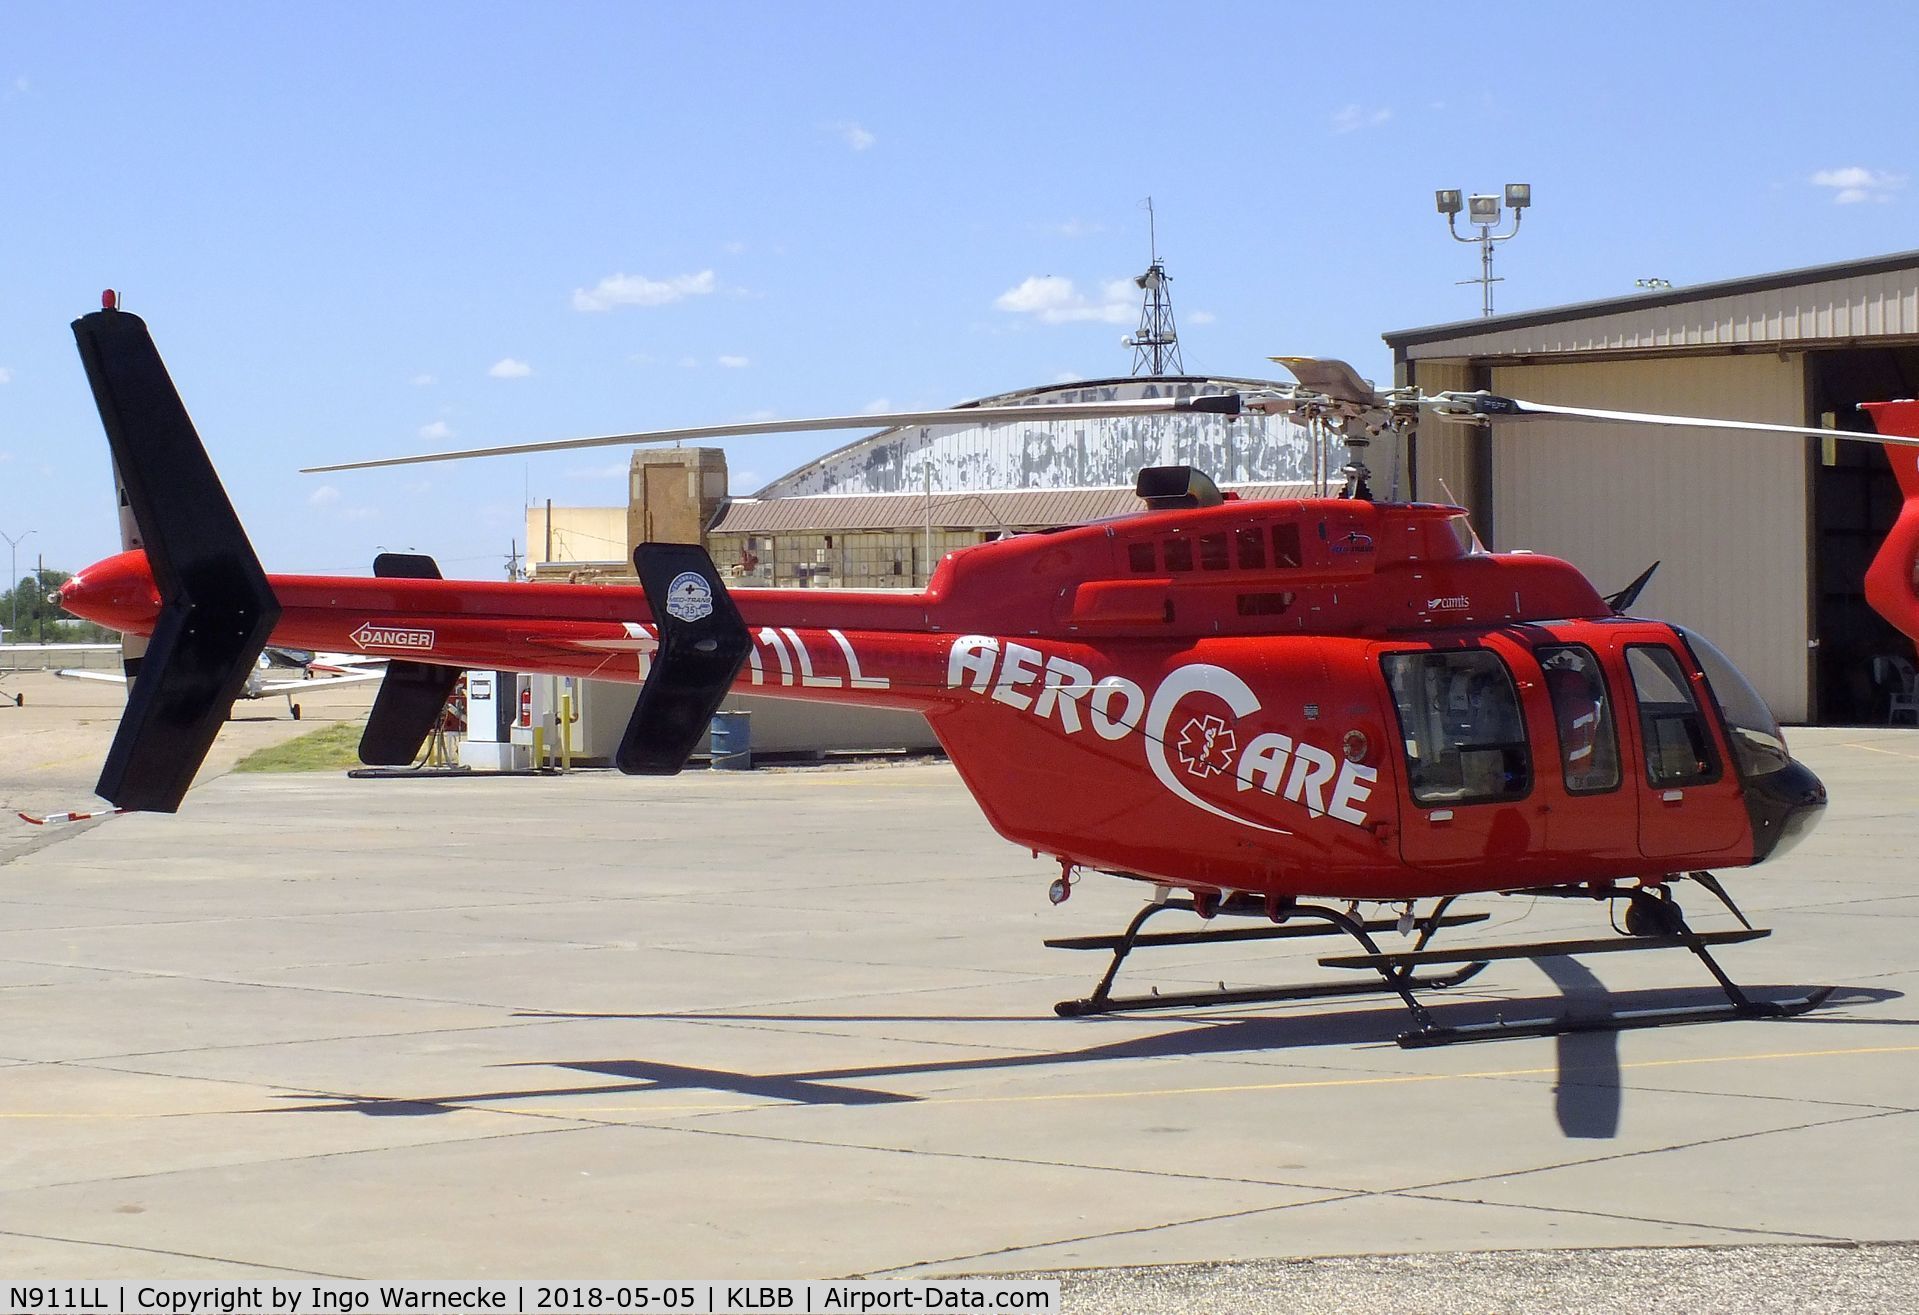 N911LL, 2007 Bell 407 C/N 53792, Bell 407 EMS of AeroCare at Lubbock Preston Smith Intl. Airport, Lubbock TX